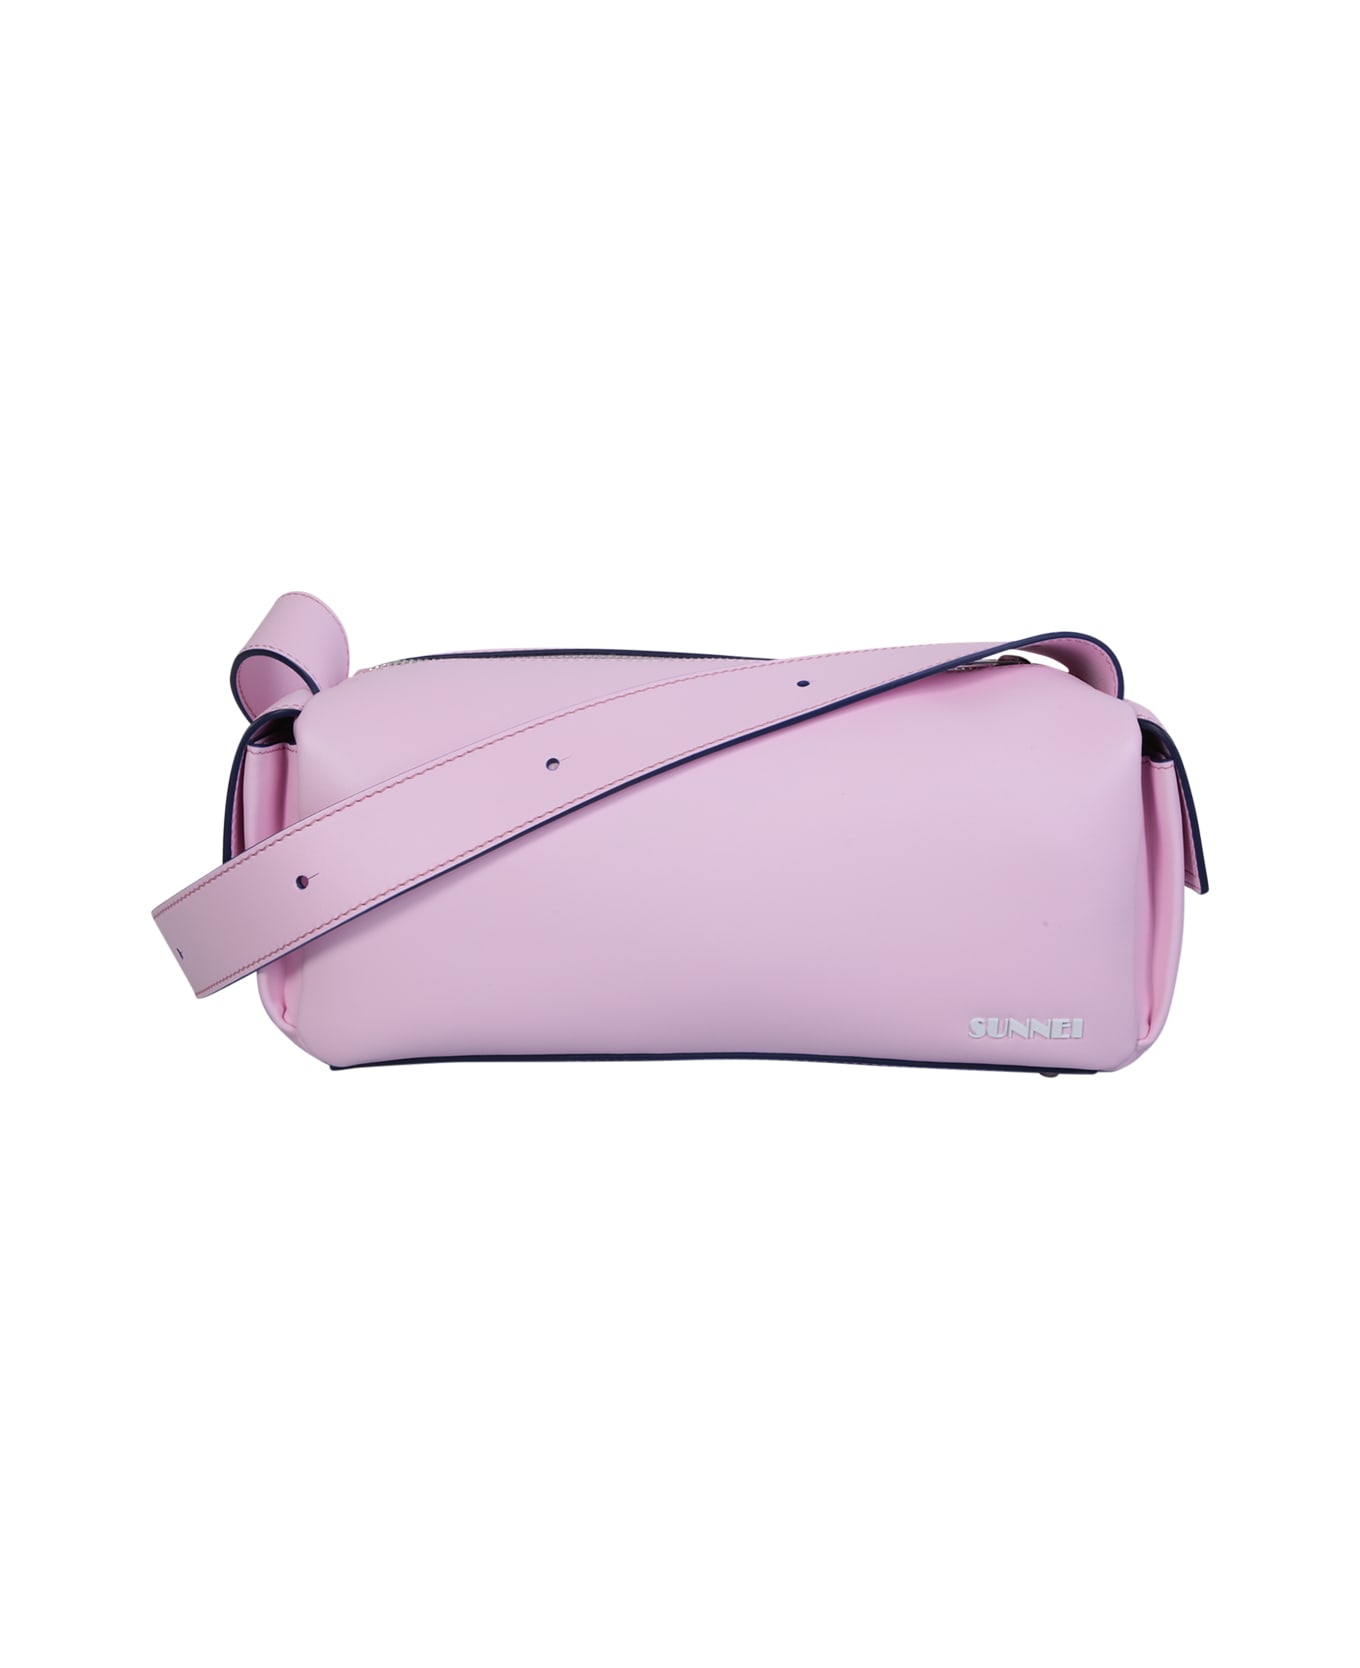 Sunnei Pink Lacubetto Bag - Pink